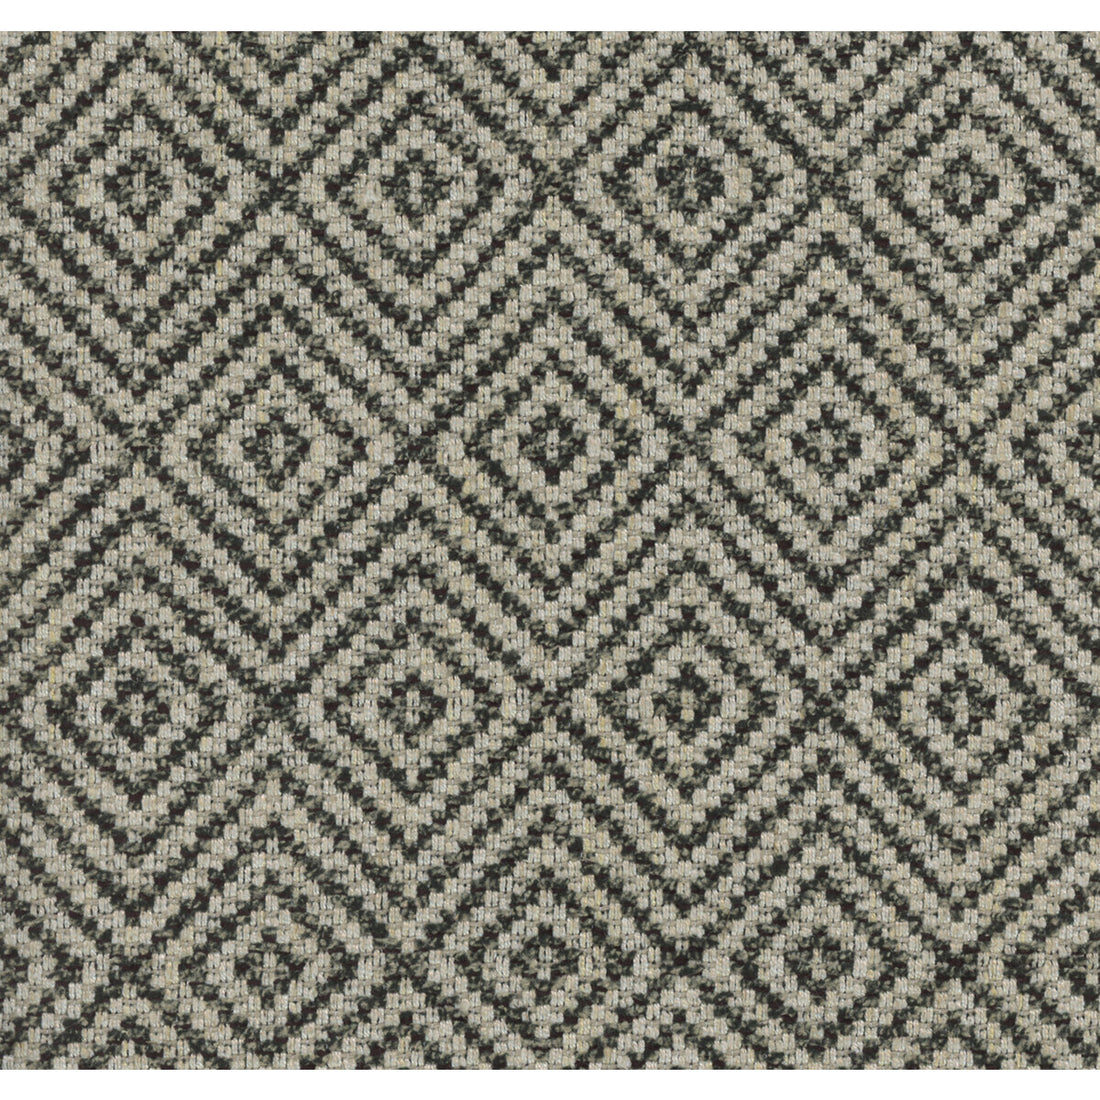 Focal Point fabric in ivory/noir color - pattern 34399.816.0 - by Kravet Couture